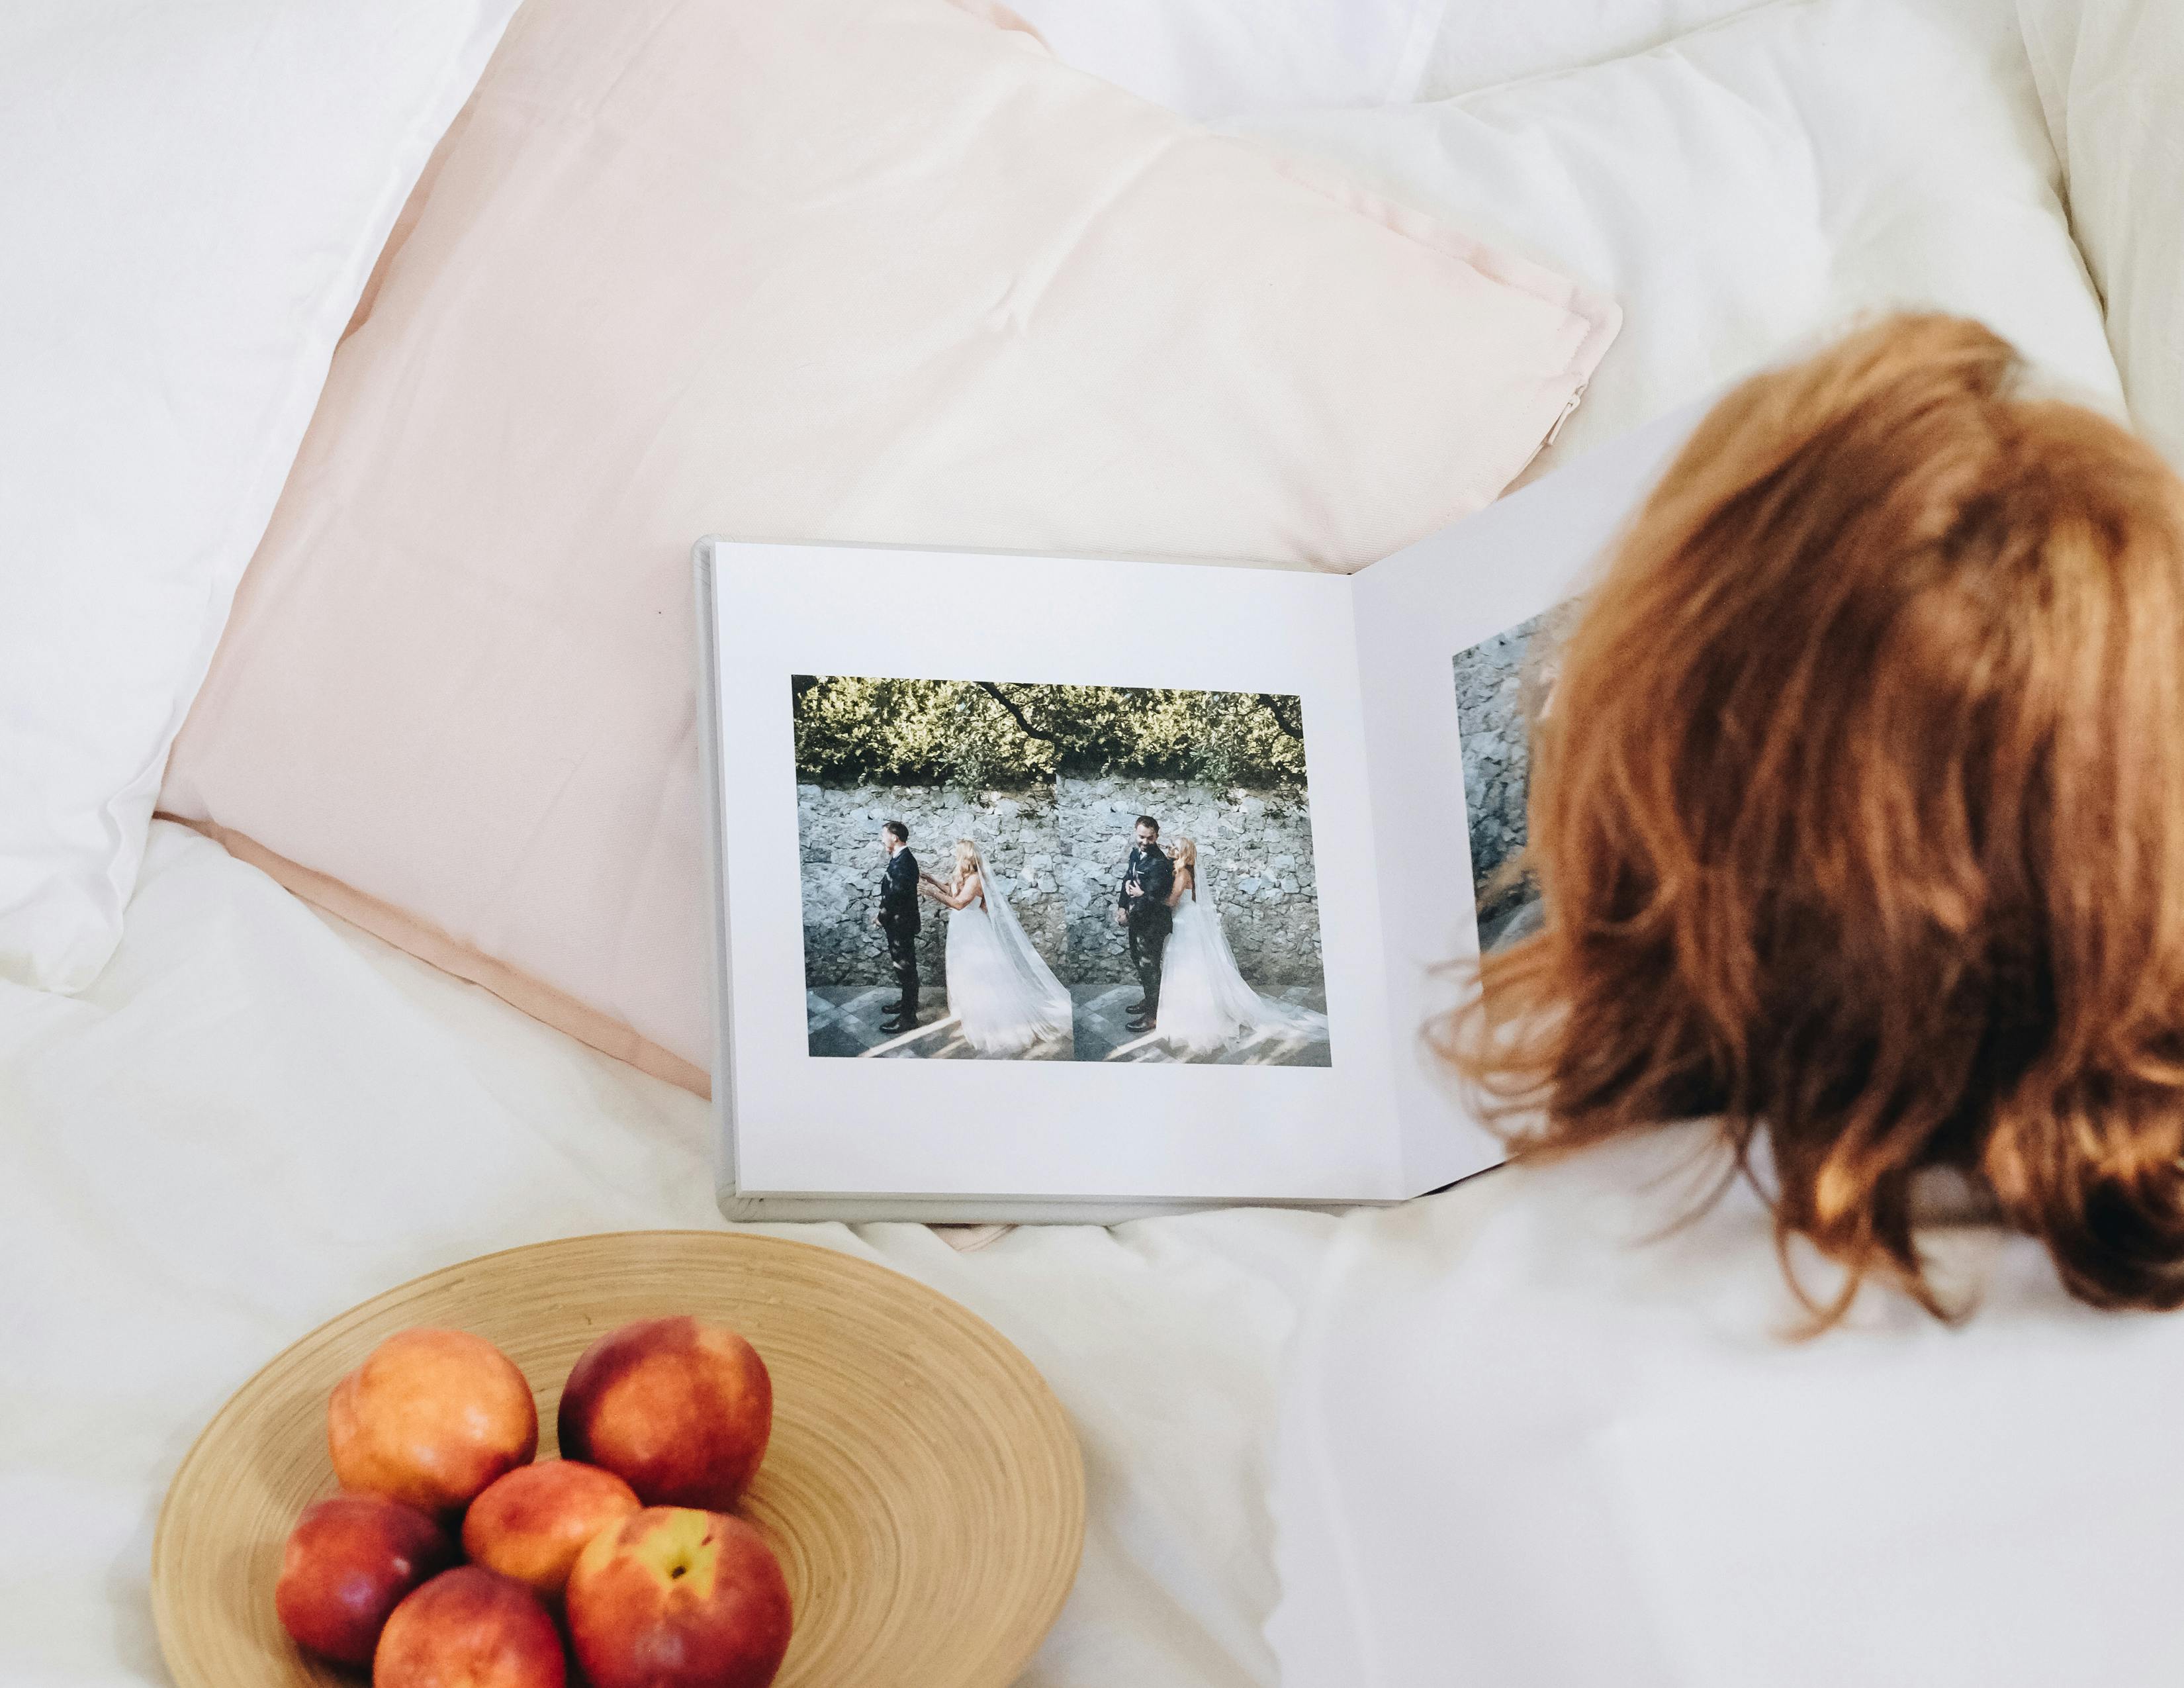 Our Guide to Selling Photo Albums Without Being "Pushy" or "Salesy"